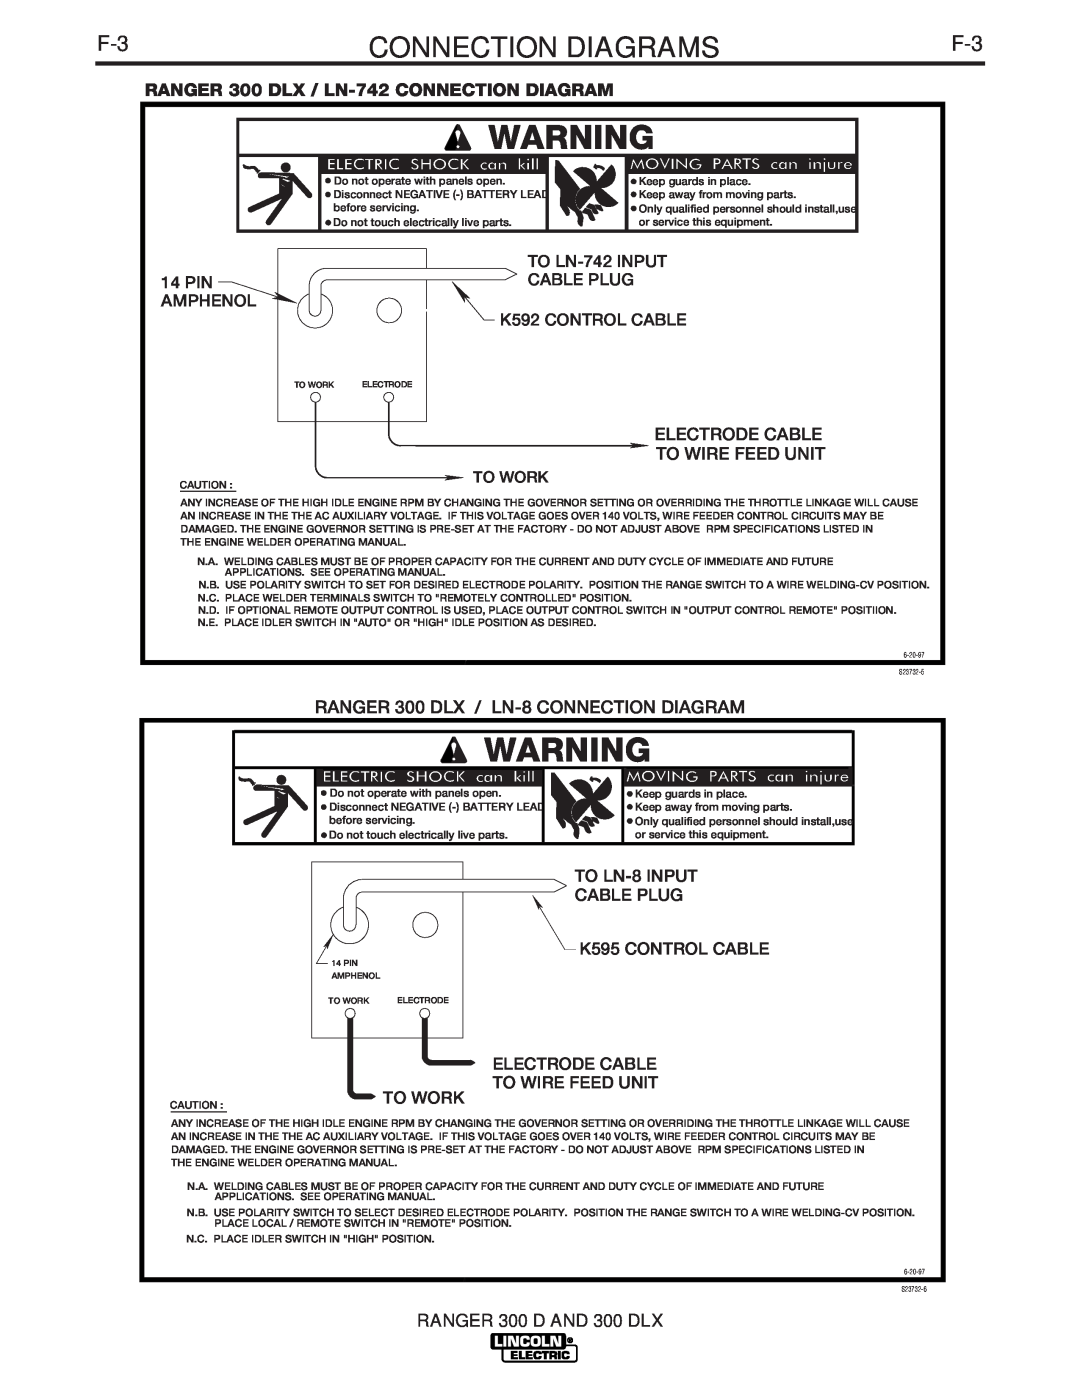 Lincoln Electric 300 DLX manual Connection Diagrams 